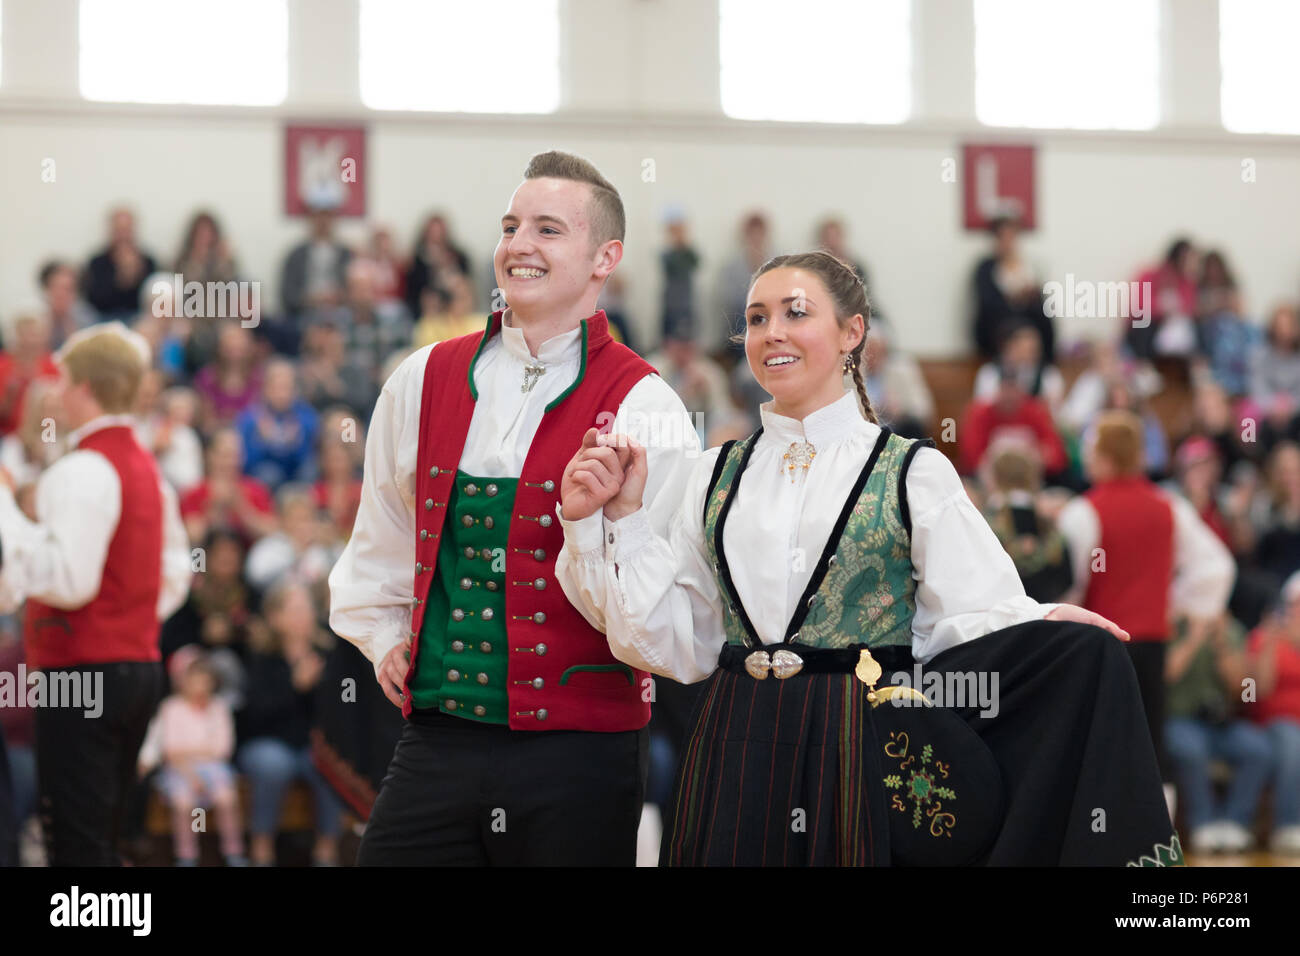 Stoughton, Wisconsin, USA - May 19, 2018 The Stoughton Norwegian Dancers, wearing traditional clothing from norway, perform traditional dances at the  Stock Photo